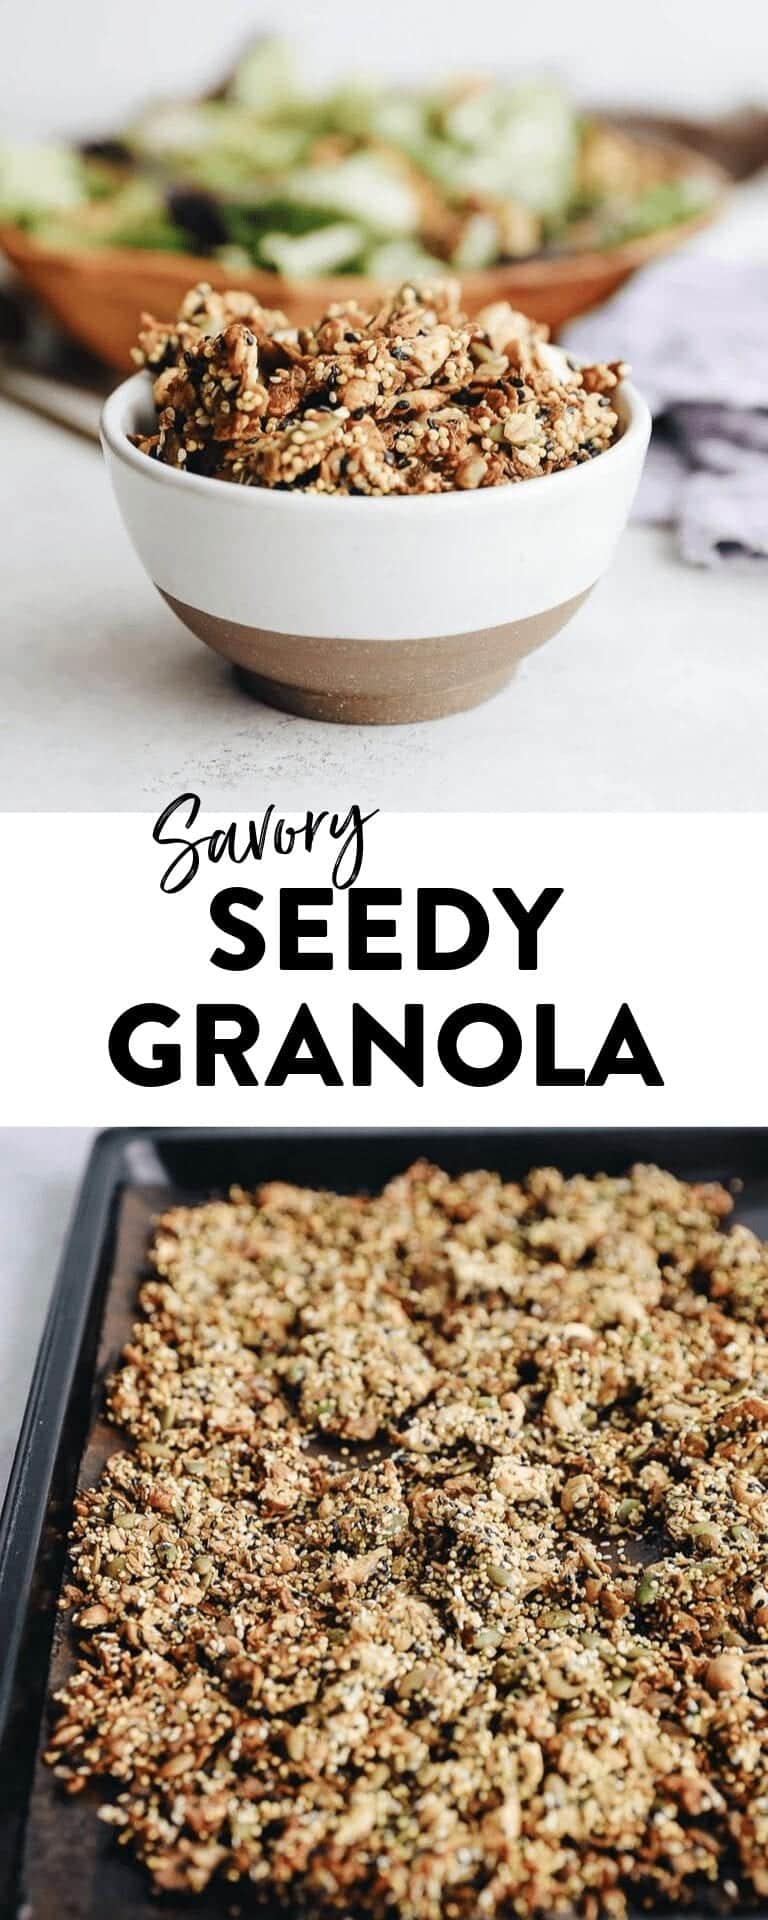 With 5 different types of seeds and a spicy zest, this savory seedy granola will take your granola game to a whole new level. Perfect for snacking or topping onto meals for a healthy boost #savorygranola #granola #healthy